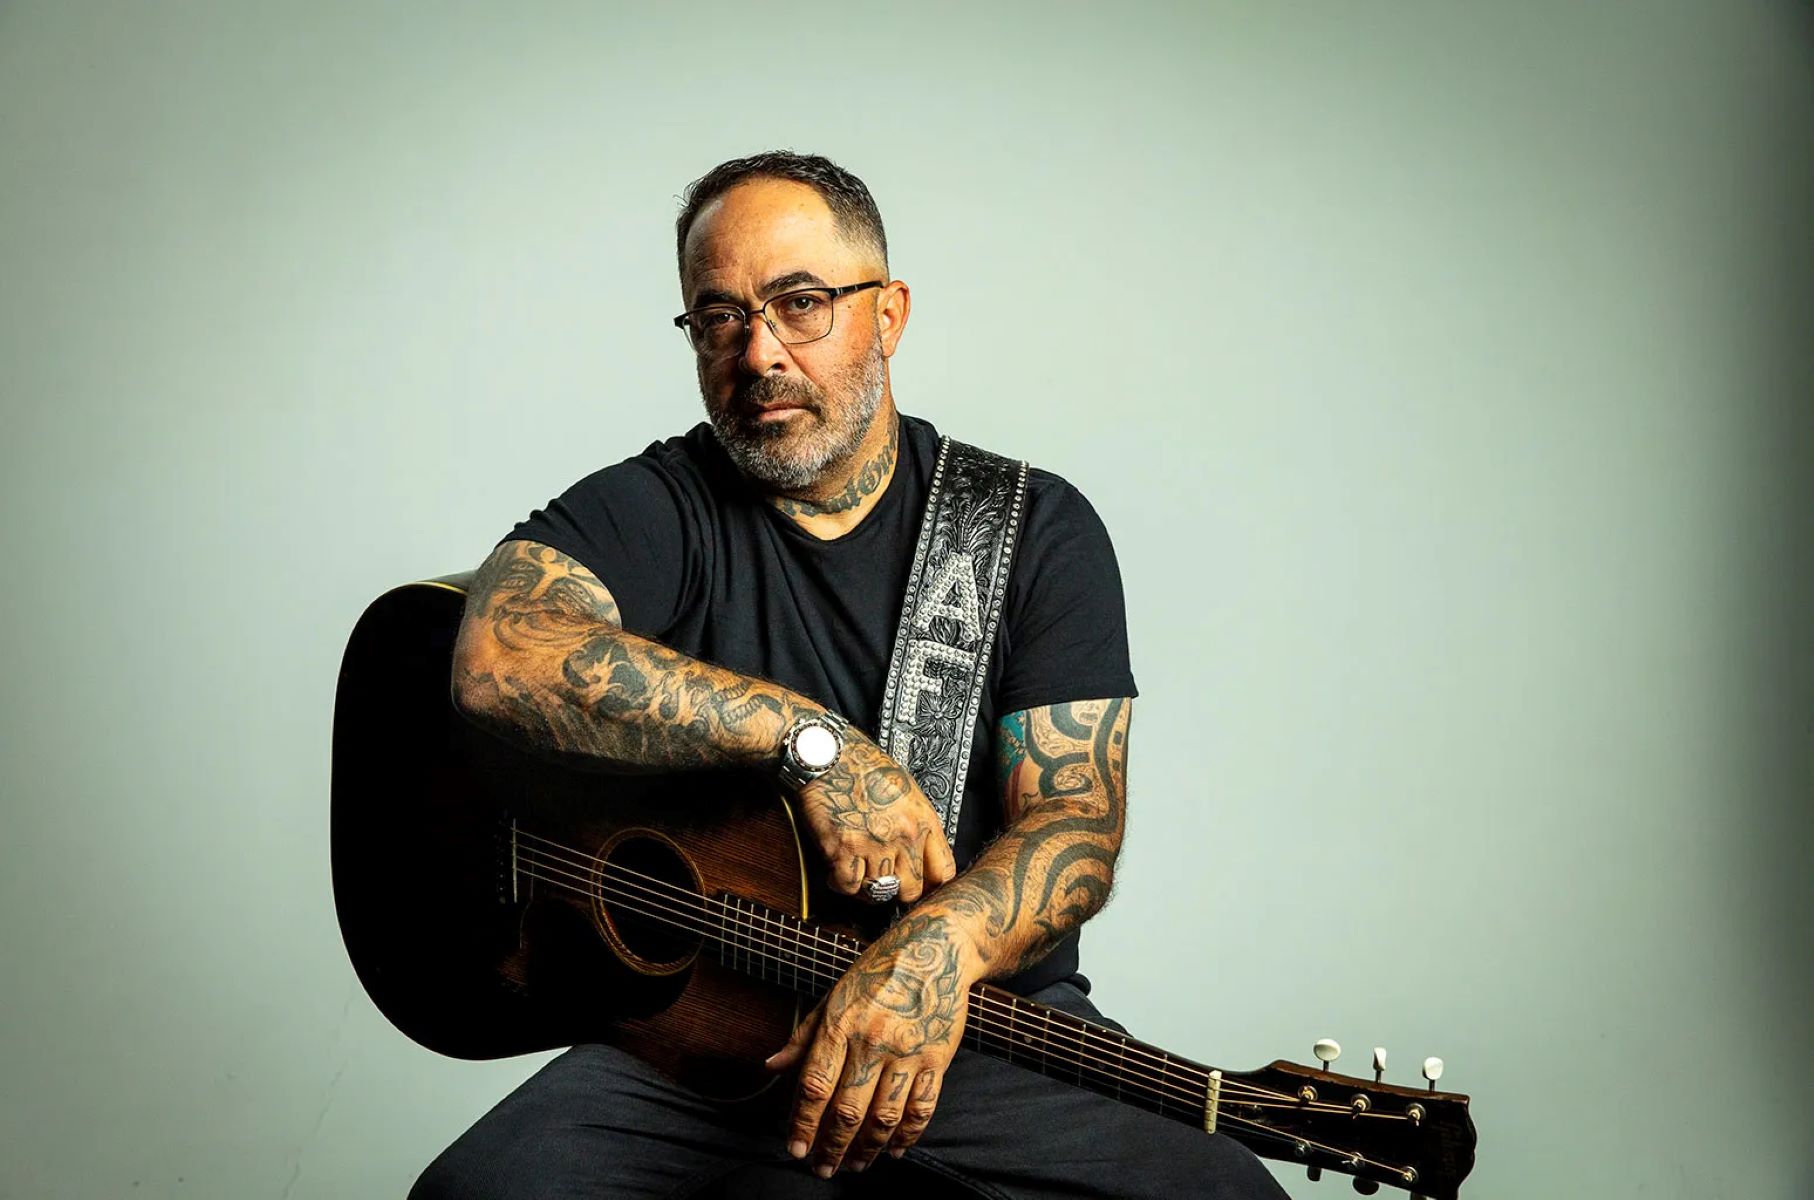 17-astonishing-facts-about-aaron-lewis